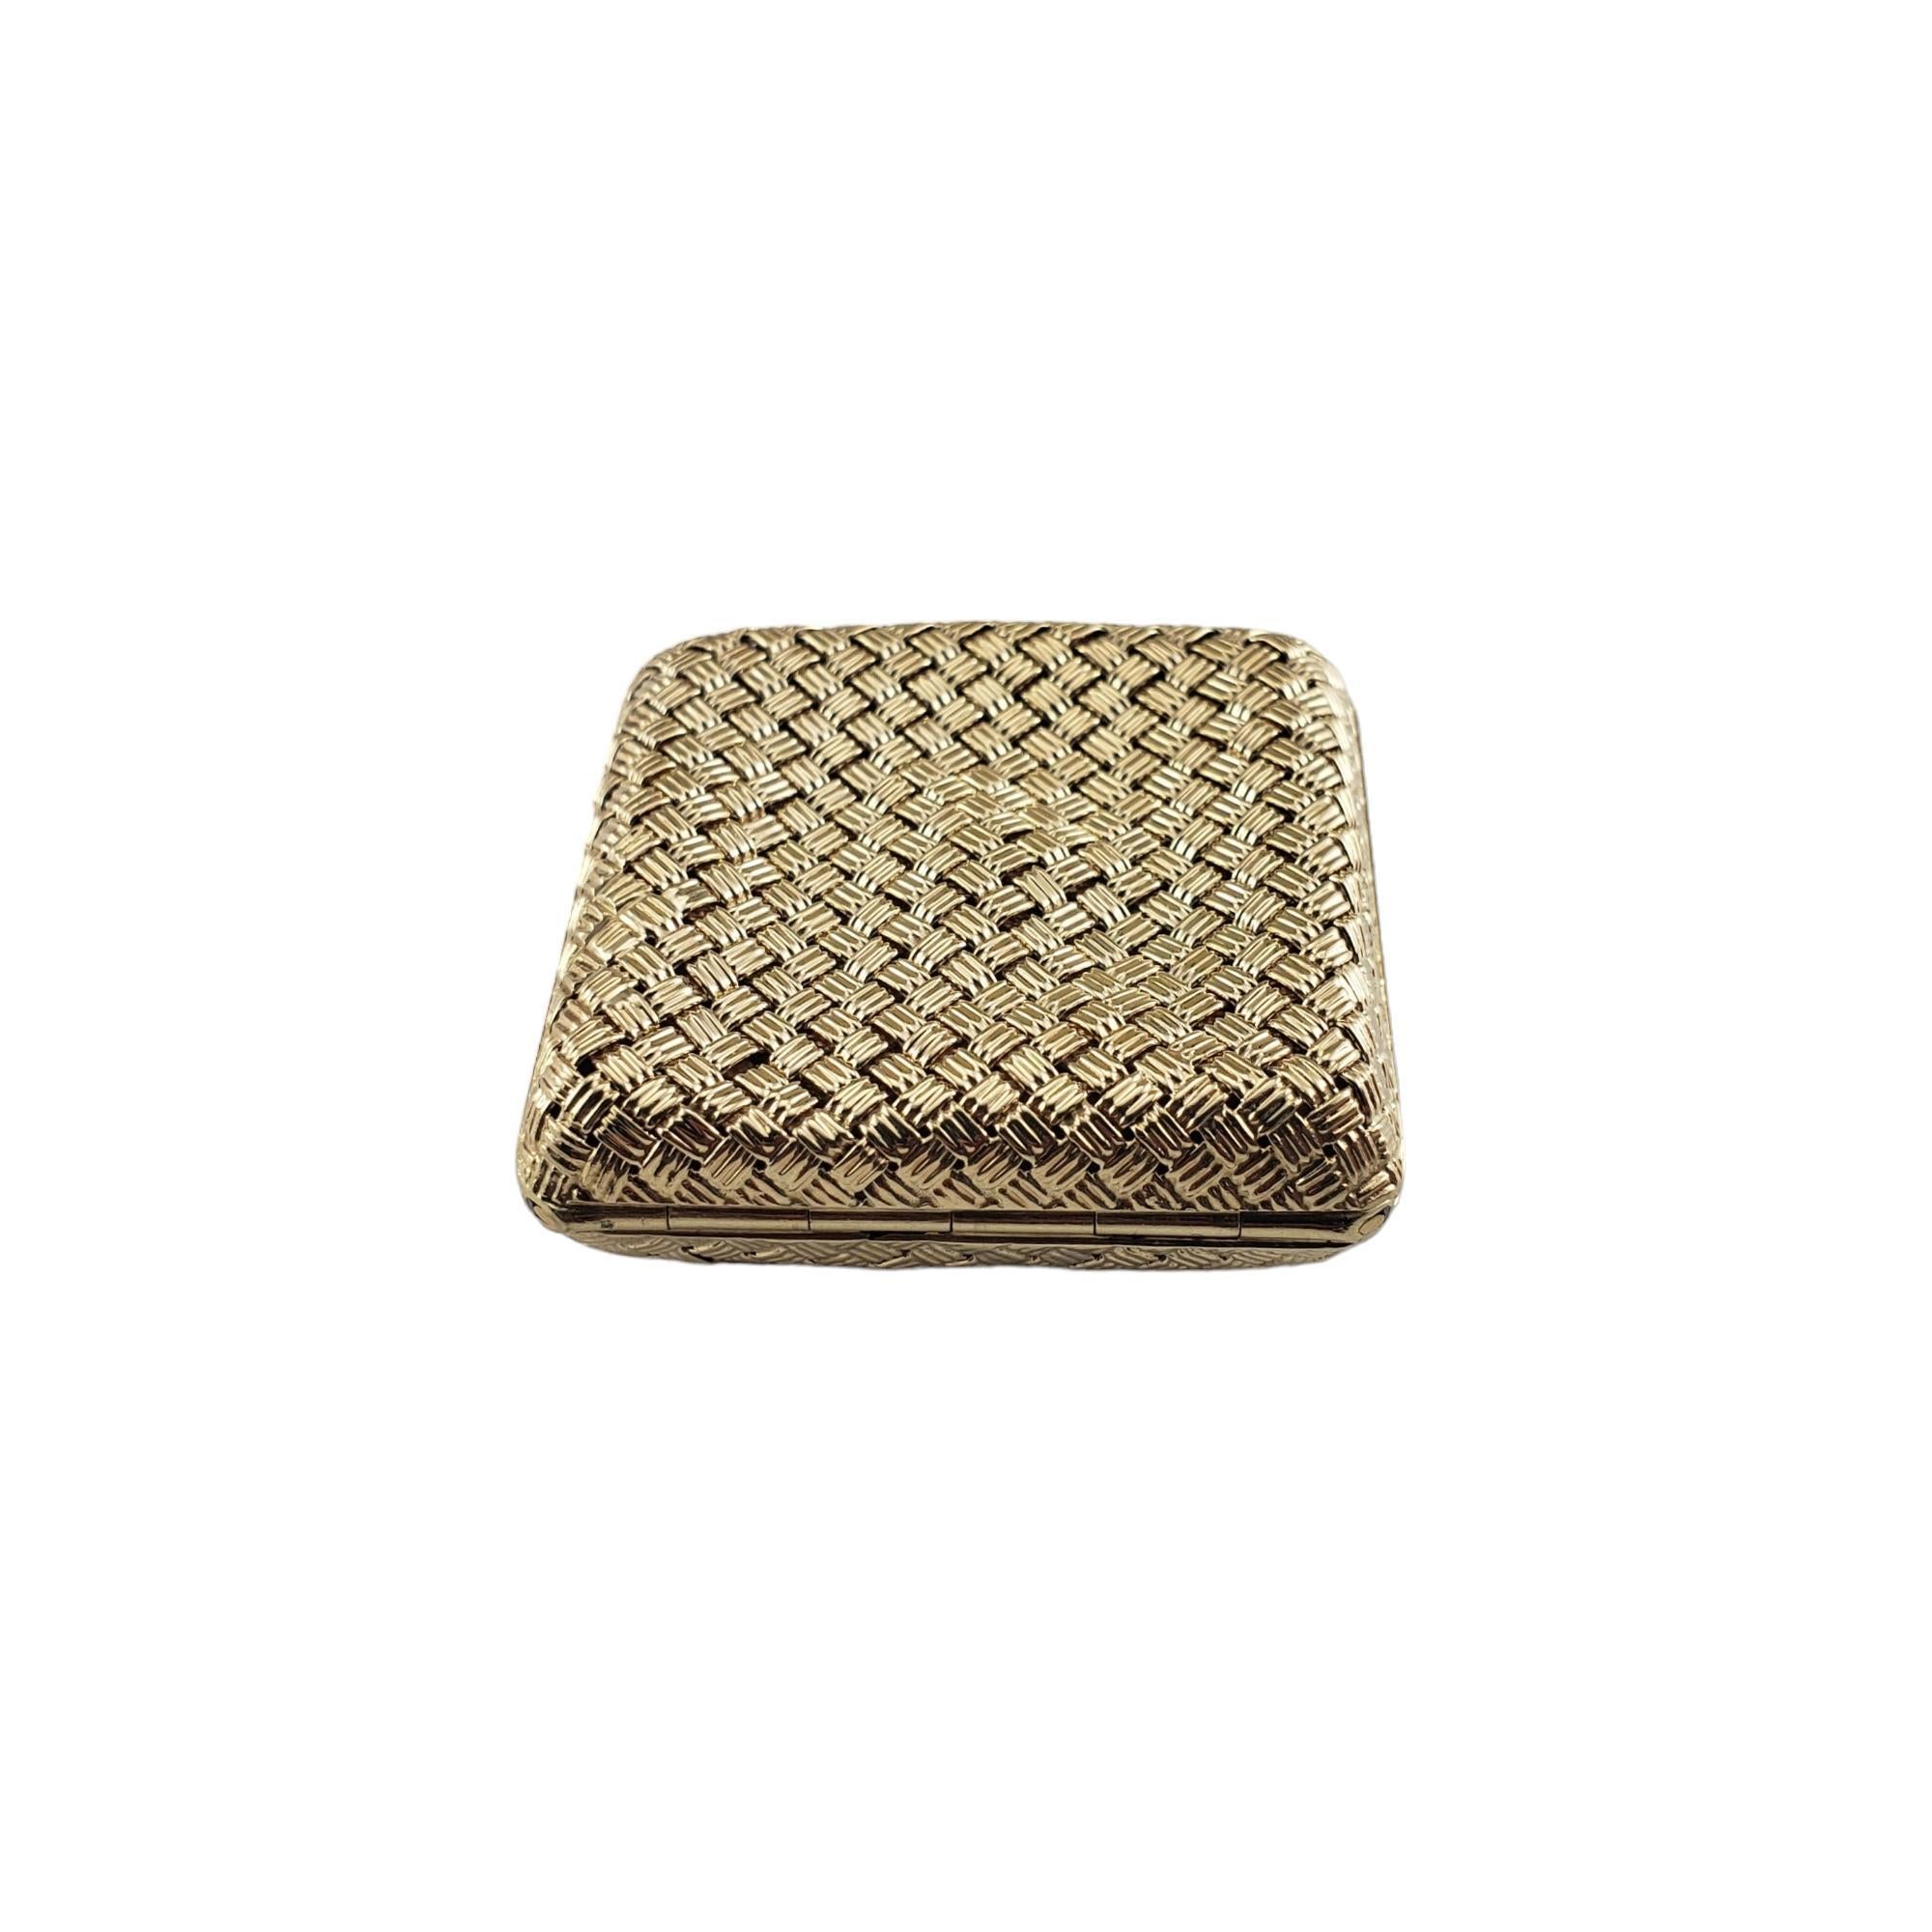 Vintage Cartier 14 Karat Yellow Gold Pill Box #16112 In Good Condition For Sale In Washington Depot, CT